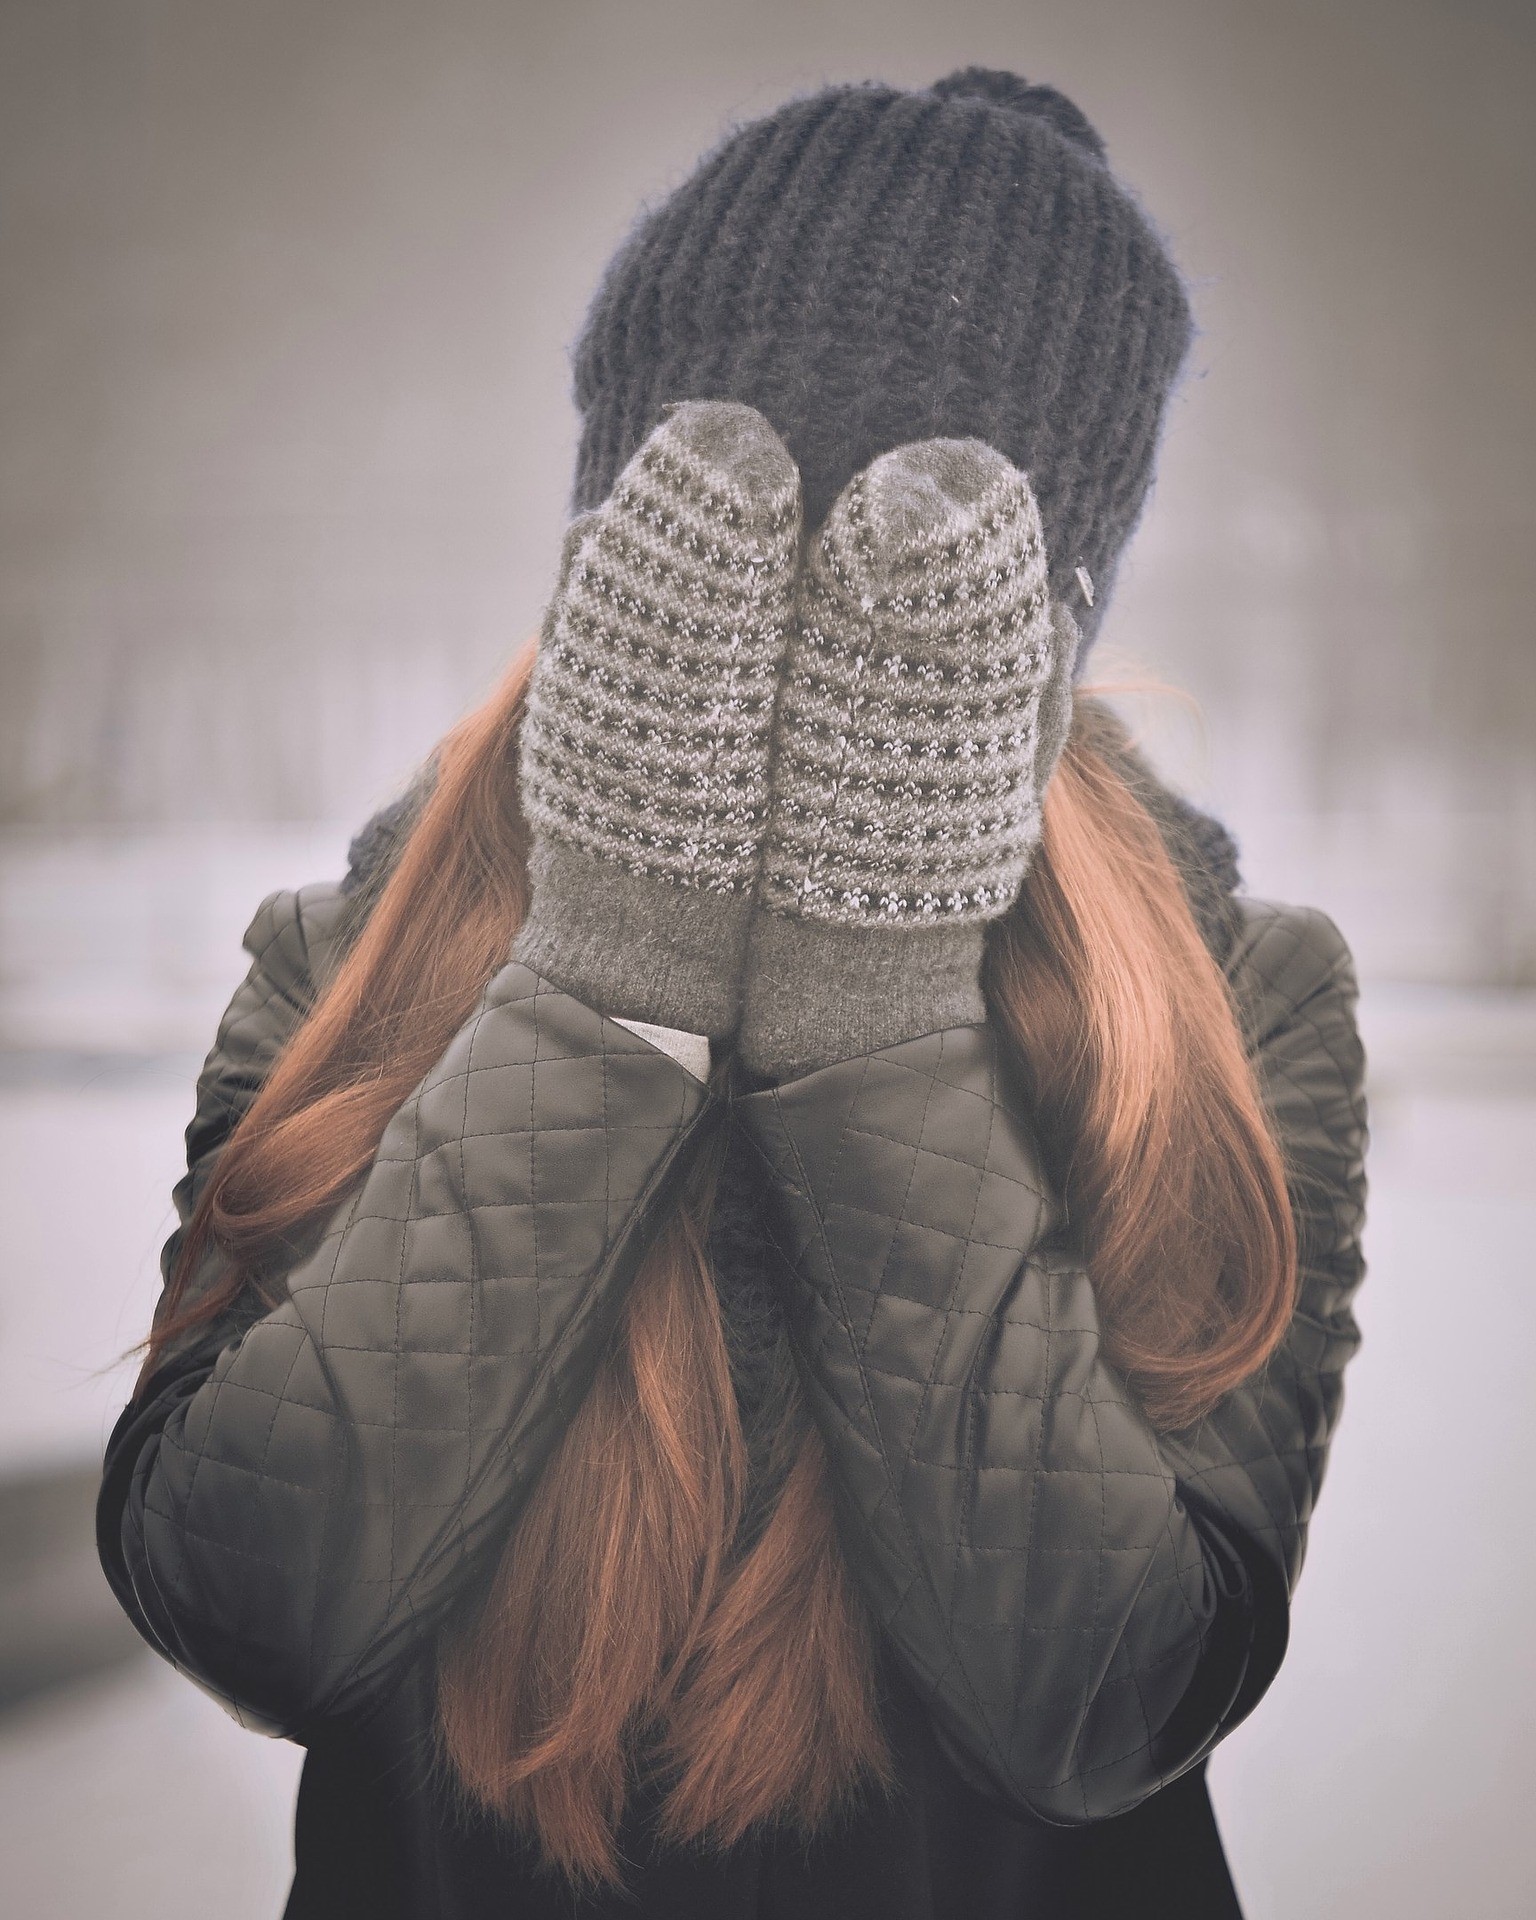 woman covering her face with gloves in a snowy forest